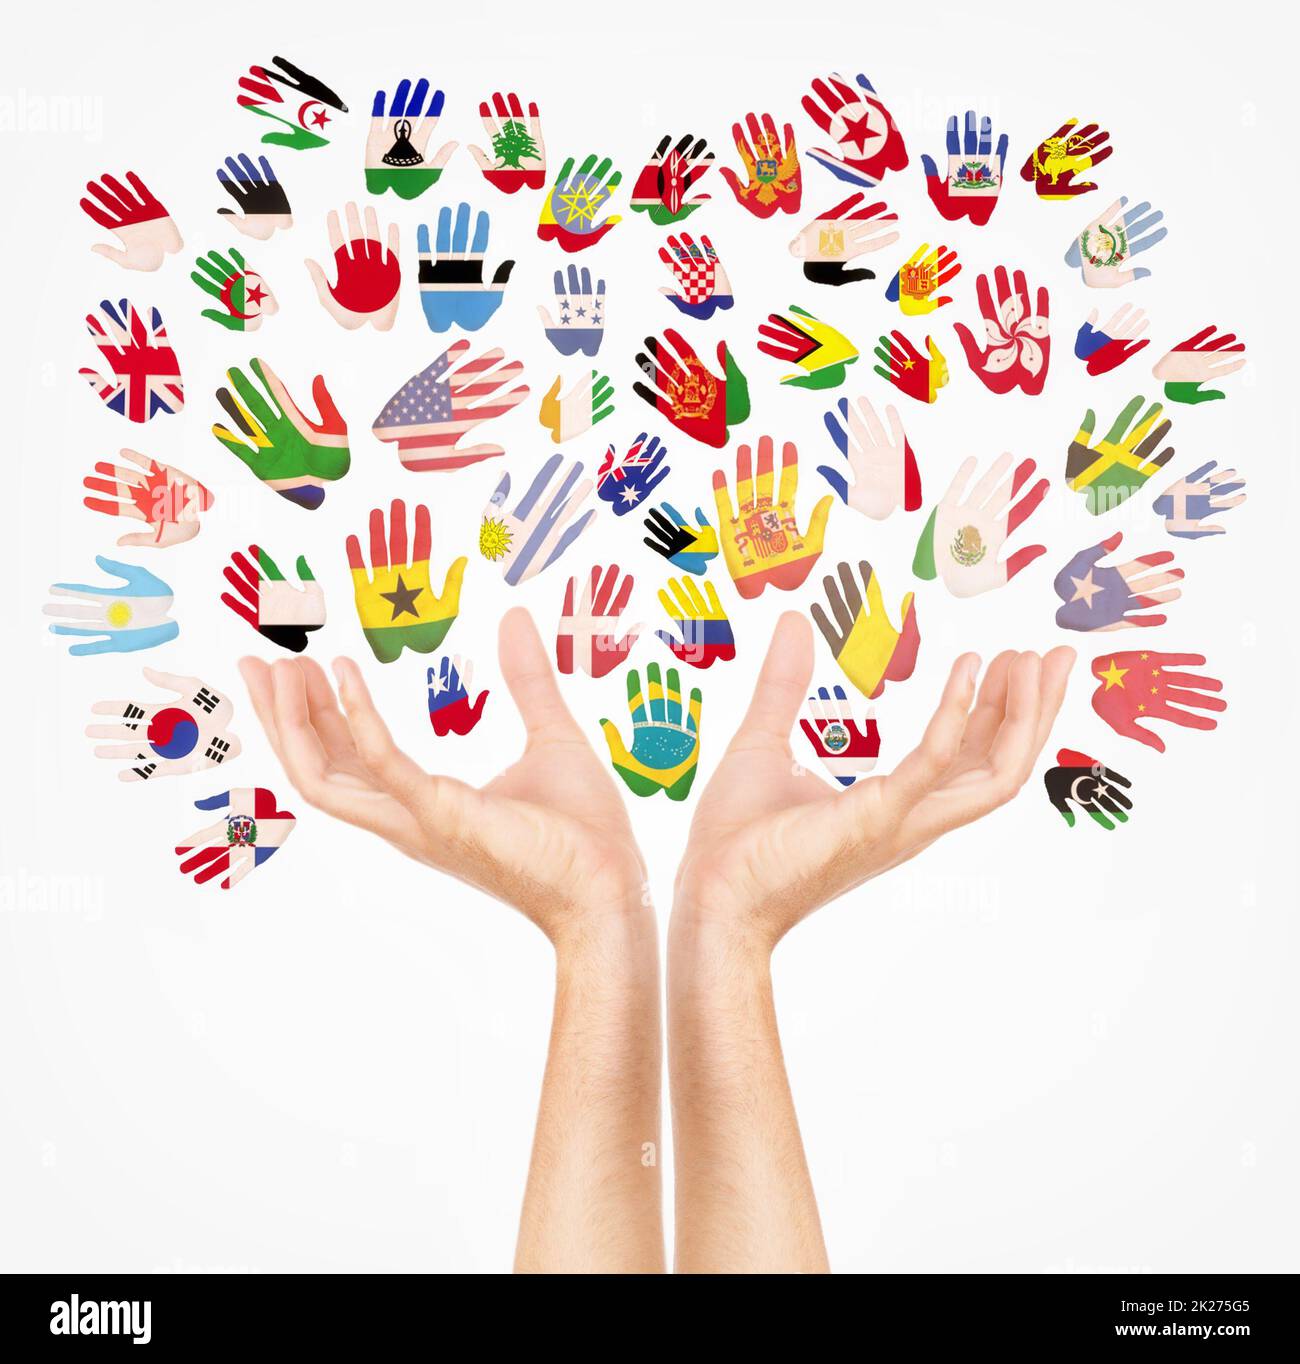 Holding your concept. Concept shot of hands forming a tree with more hands forming leaves with flags on them. Stock Photo